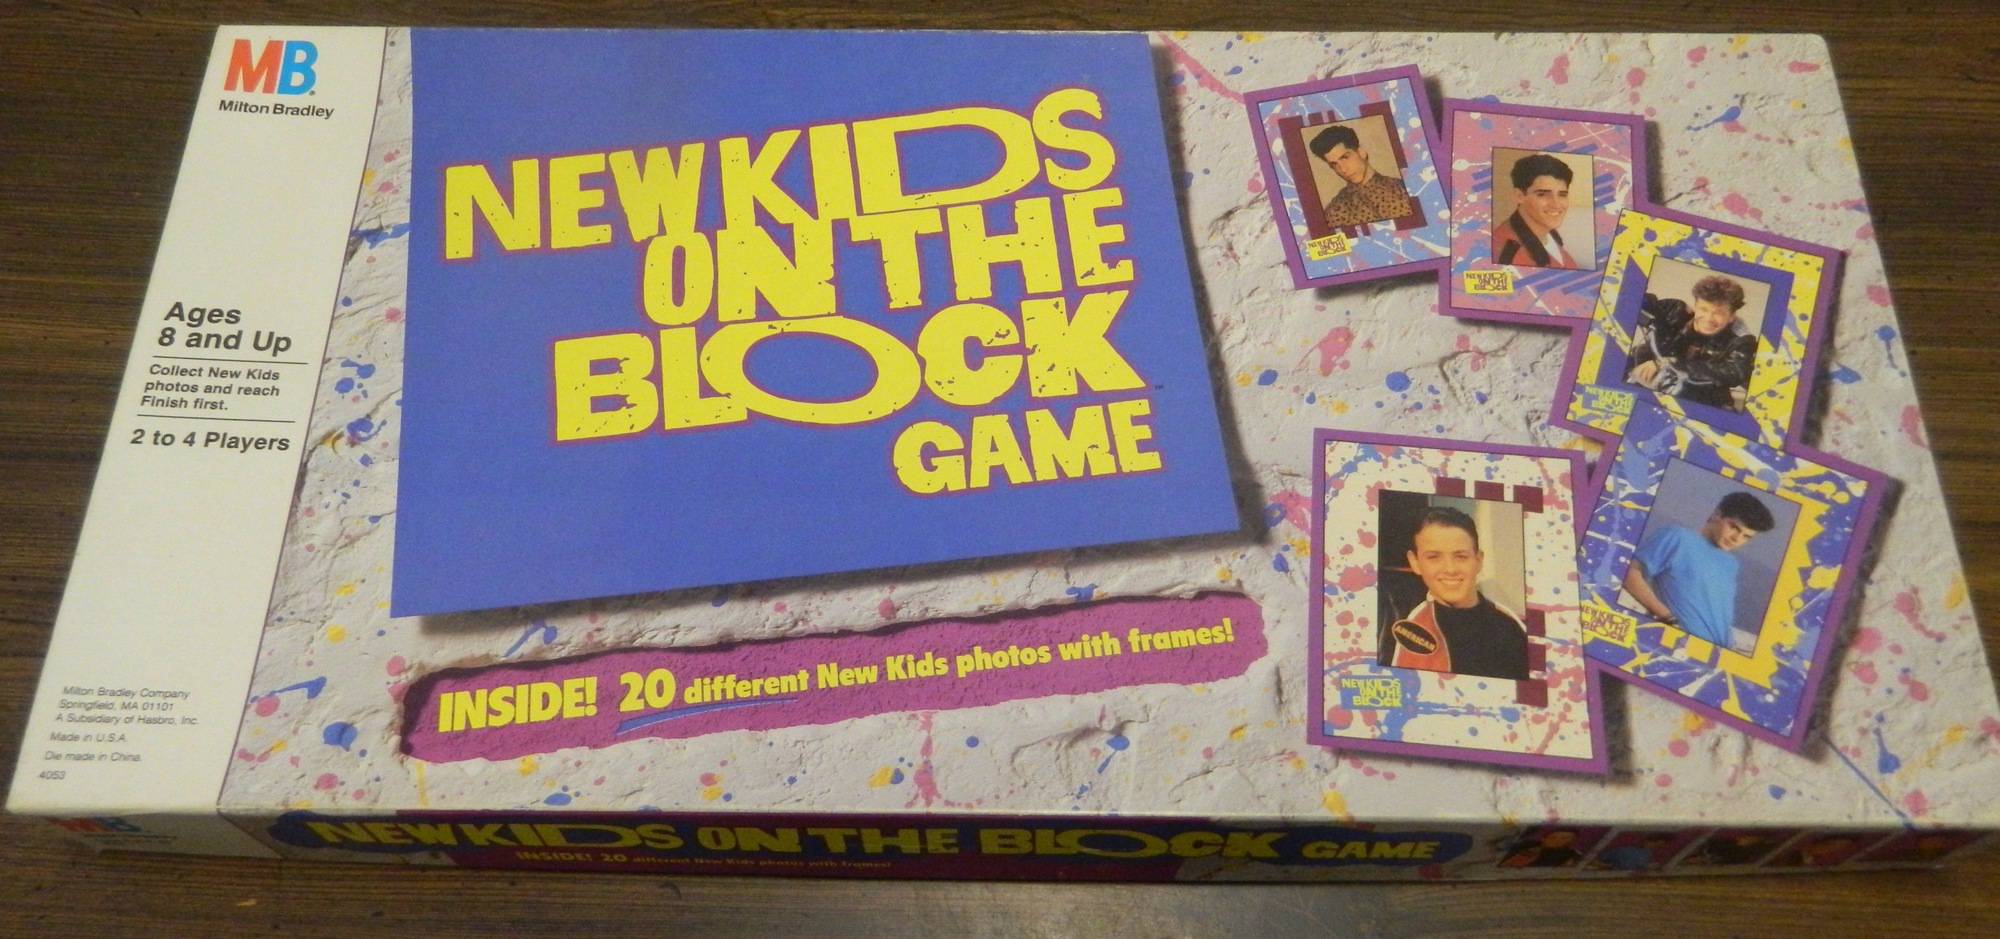 New Kids On The Block Game Board Game Review and Rules